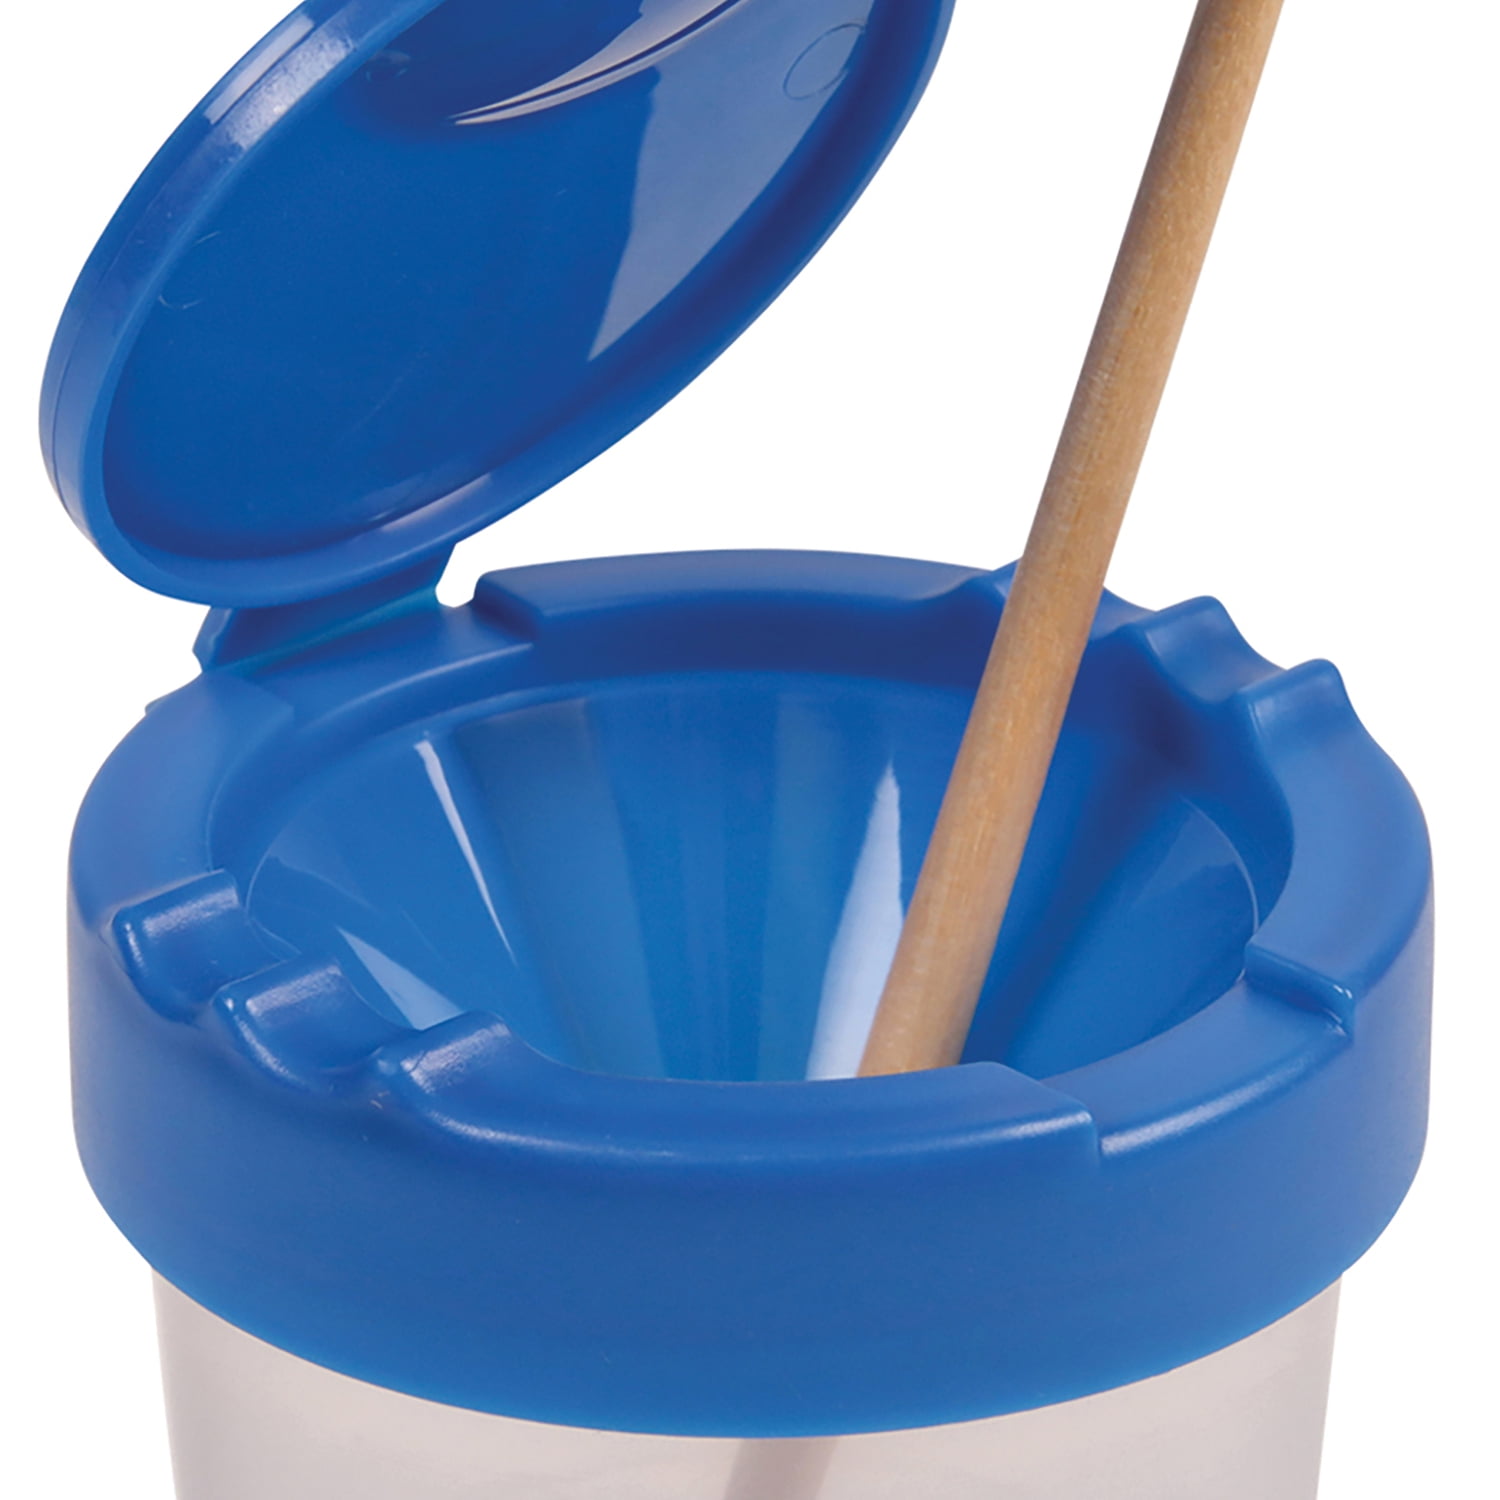 Antimicrobial No Spill Paint Cup, 3.46 w x 3.93 h, Blue  Emergent Safety  Supply: PPE, Work Gloves, Clothing, Glasses